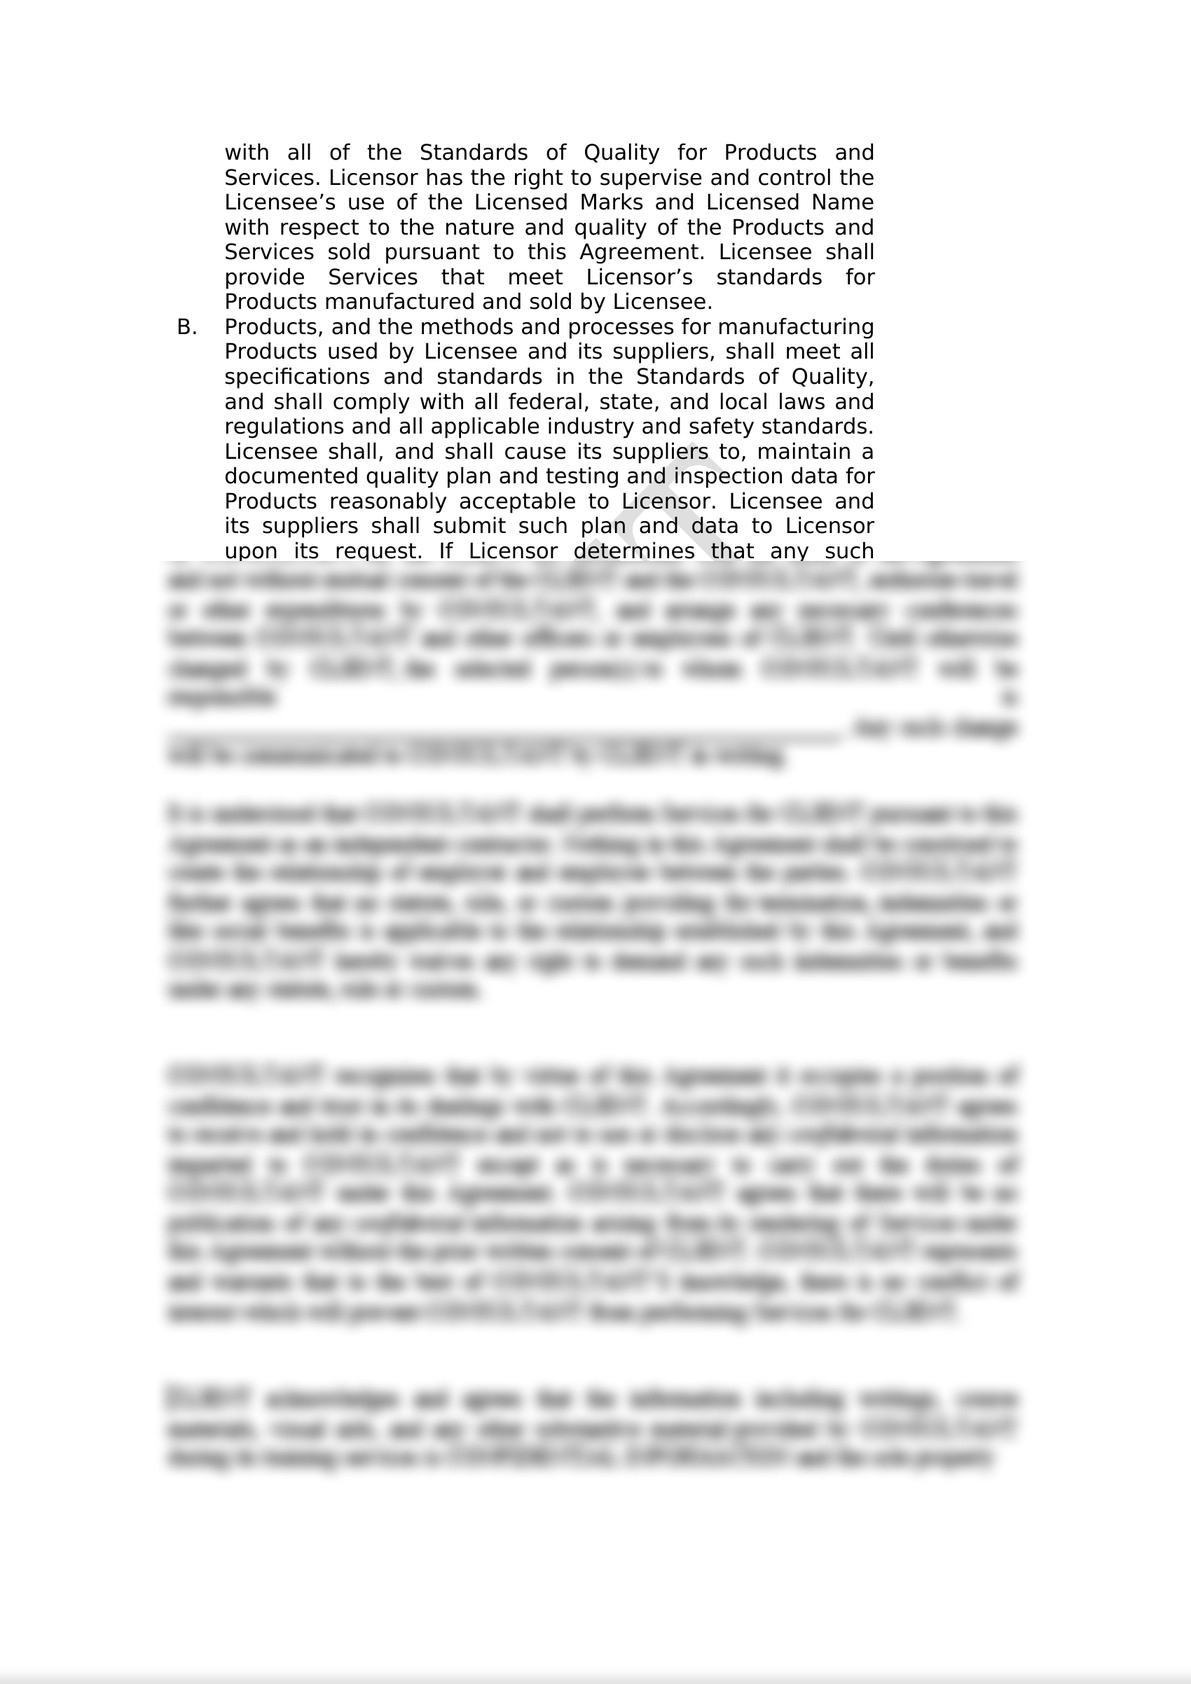 Inter-Company Intellectual Property Licensing Agreement-4